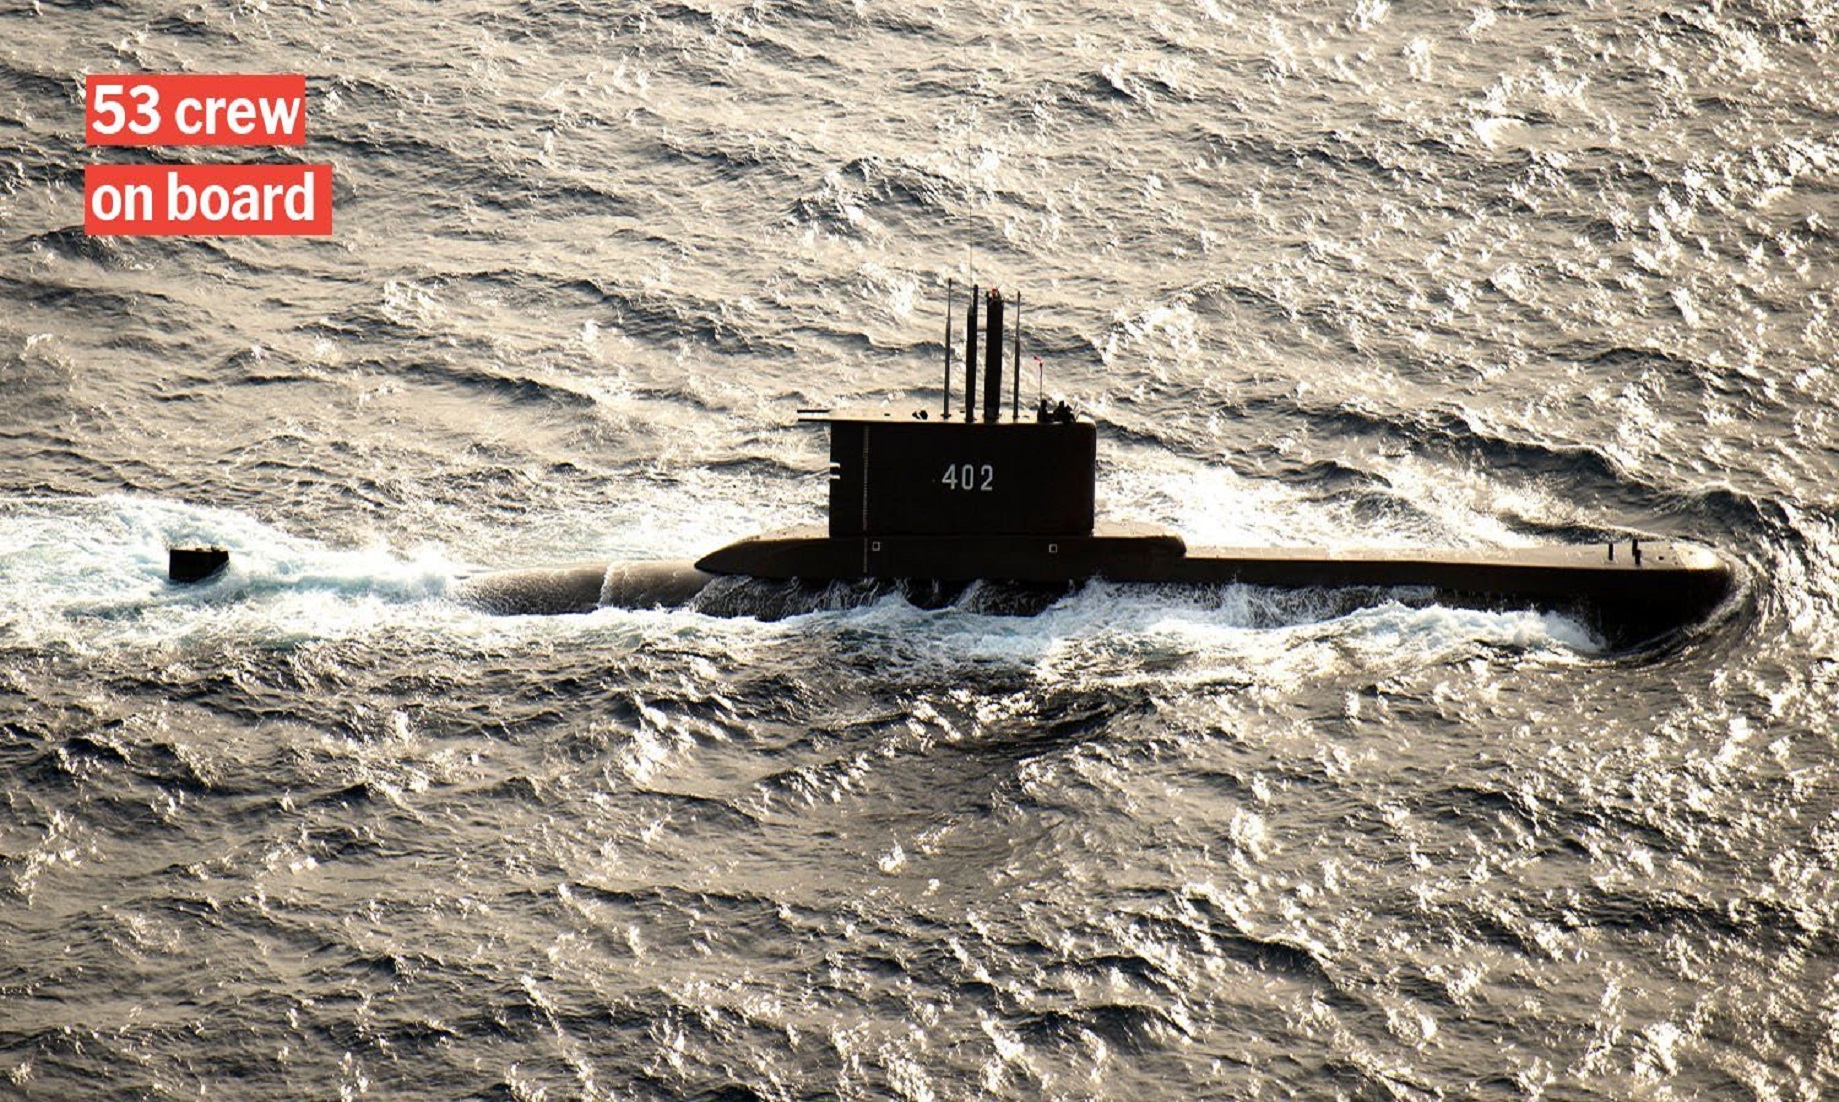 Australia Offers To Help Indonesia Search For Missing Submarine